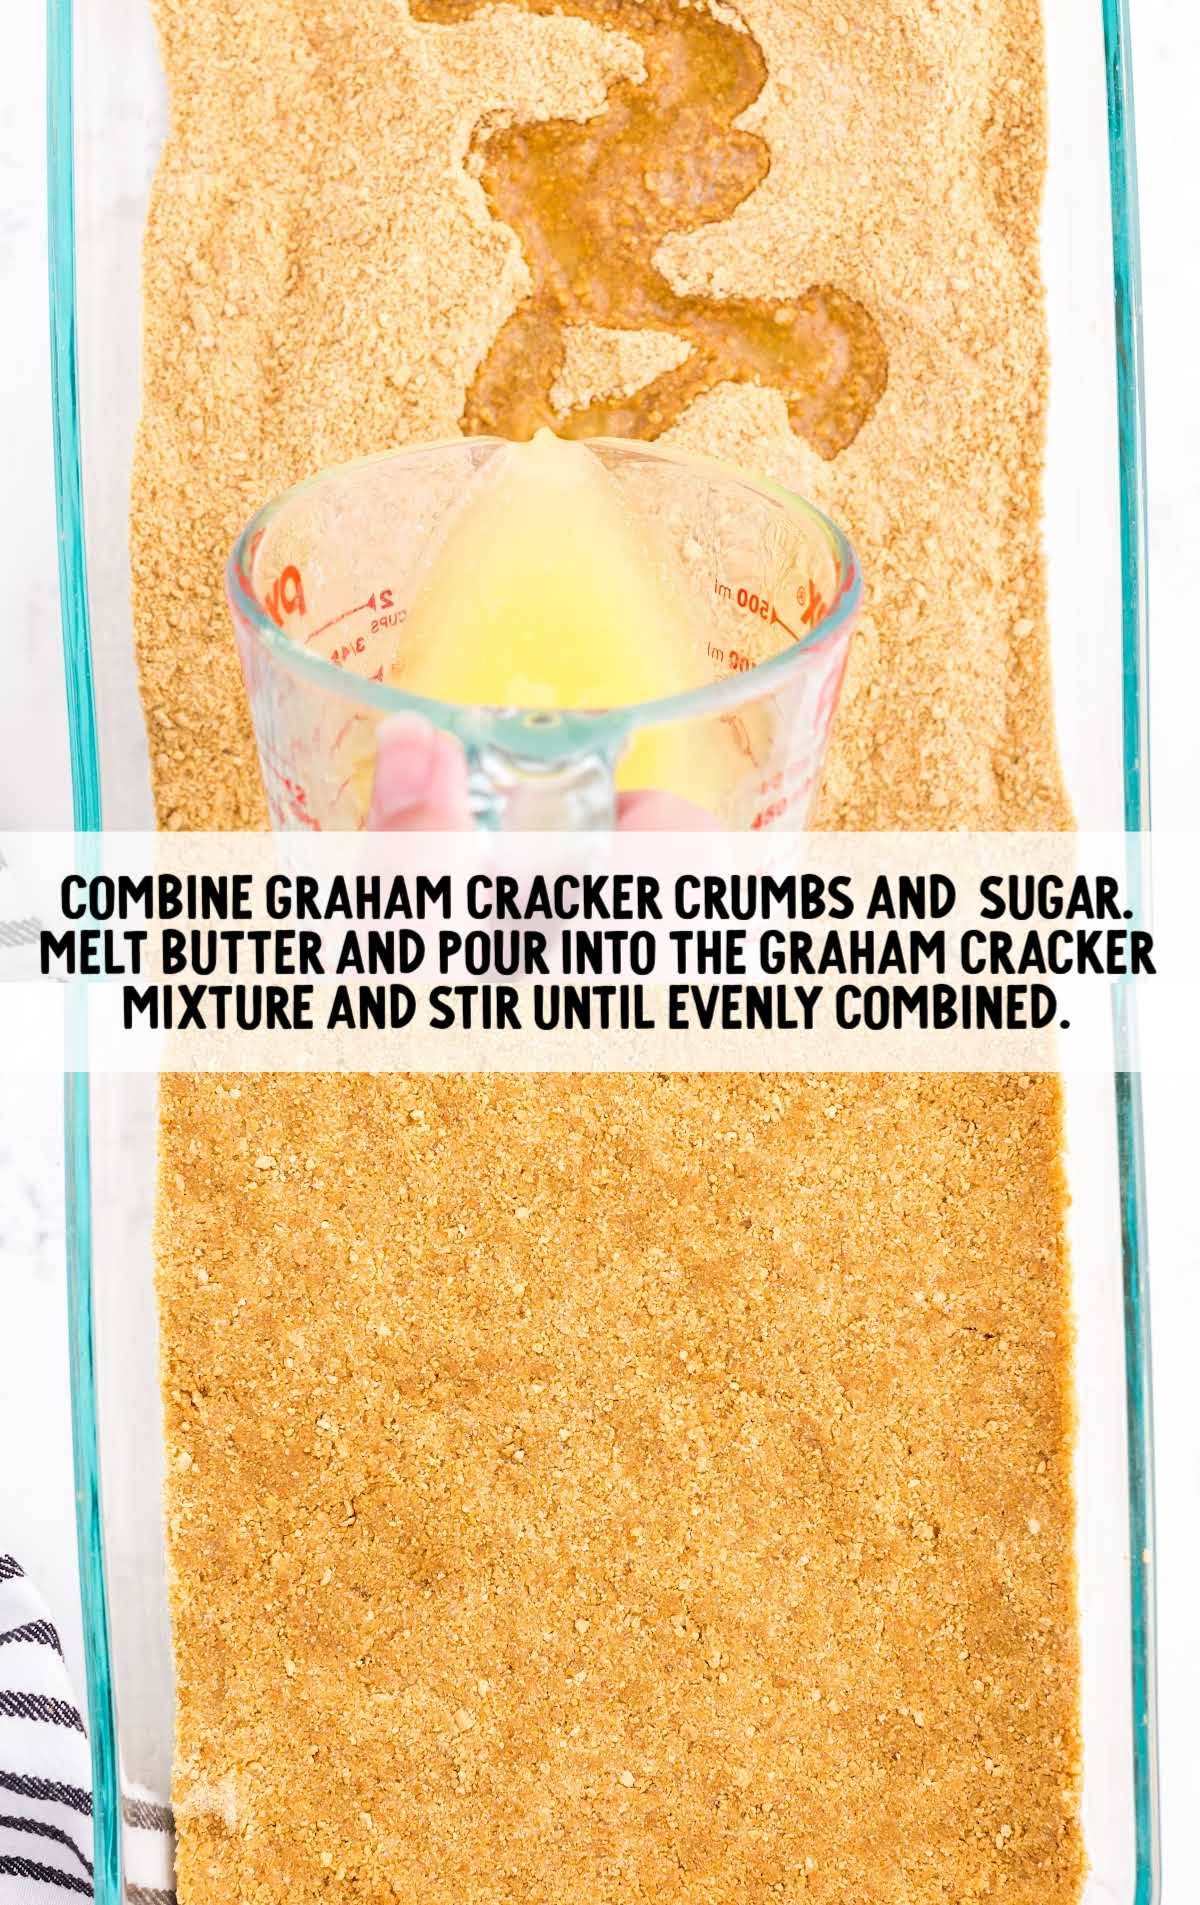 graham cracker crumbs combined with melted butter and sugar